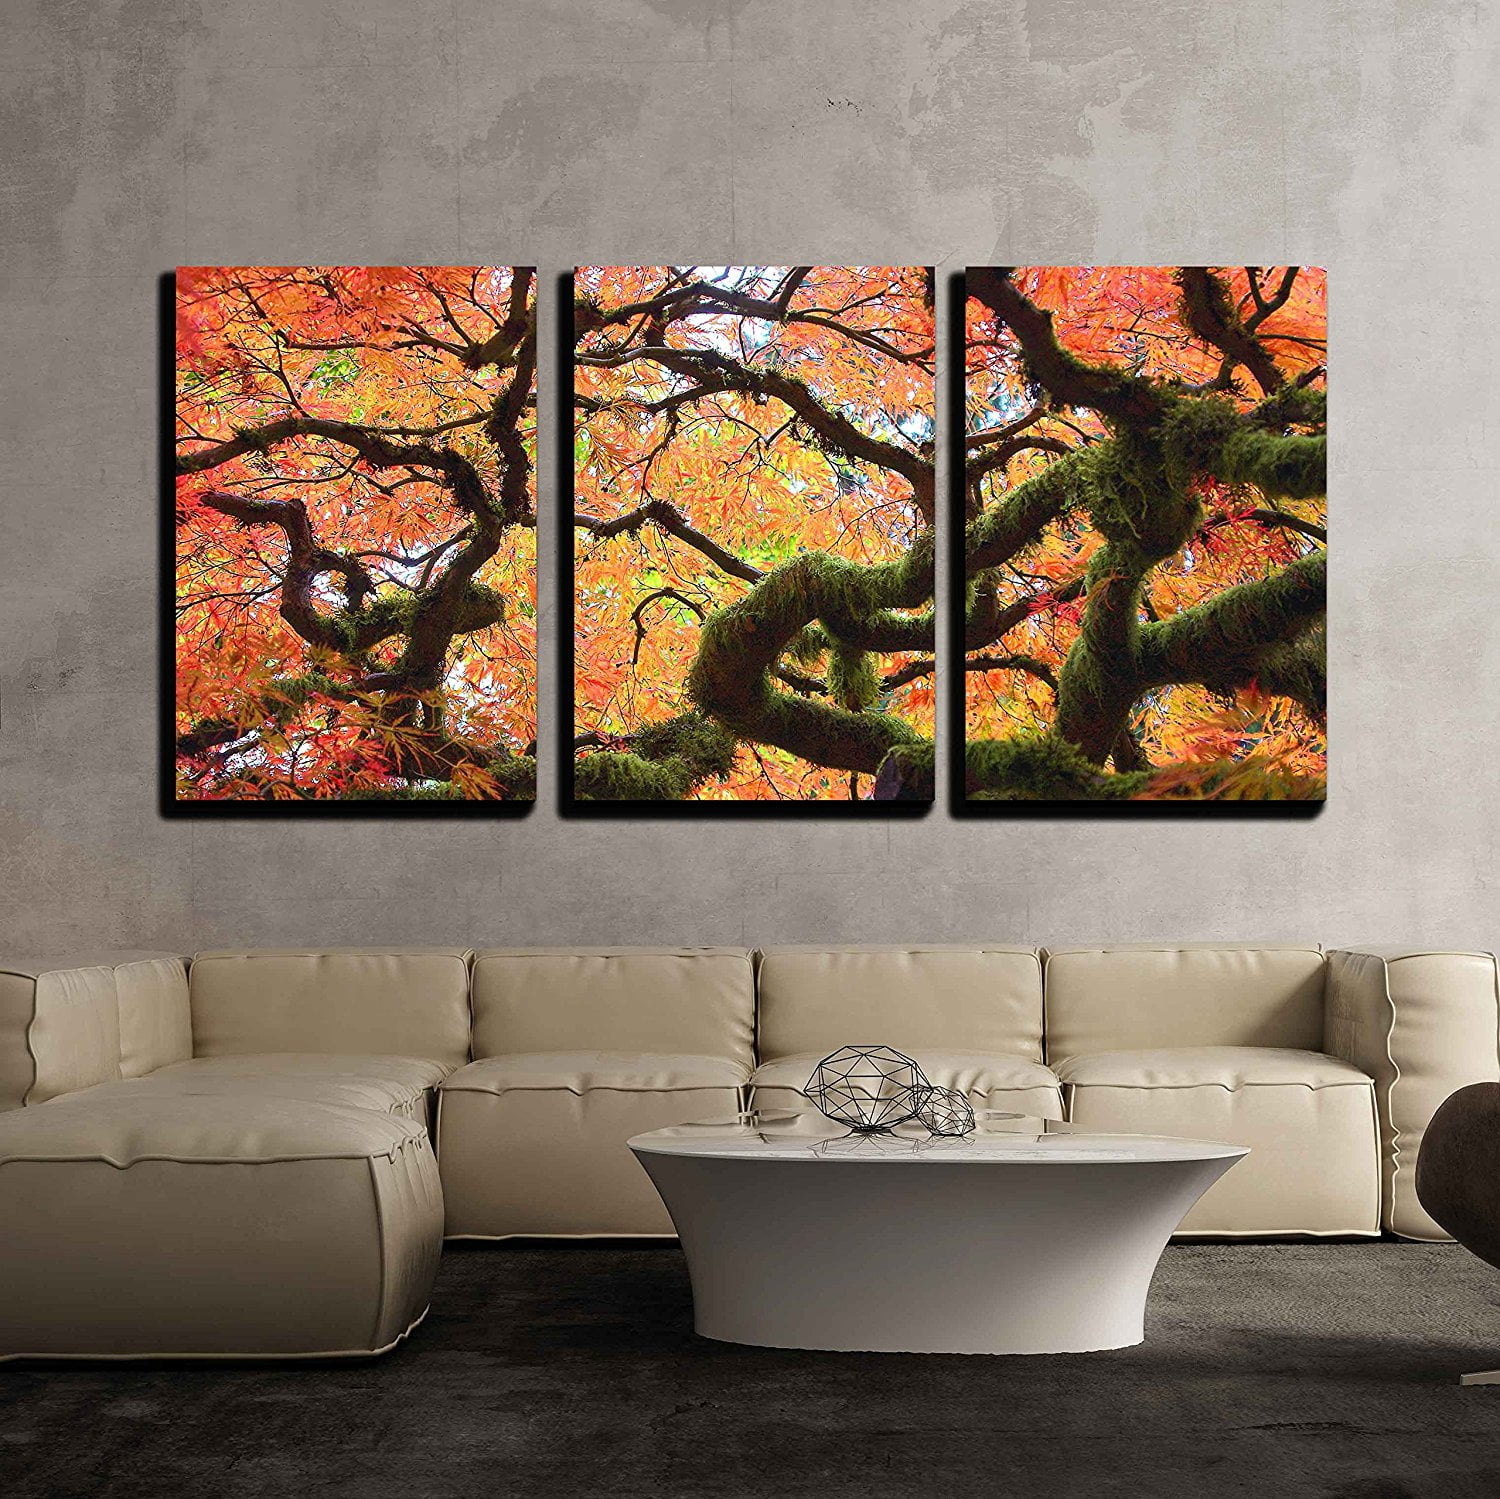 wall26 - 3 Piece Canvas Wall Art - Gnarly Japanese Maple ...